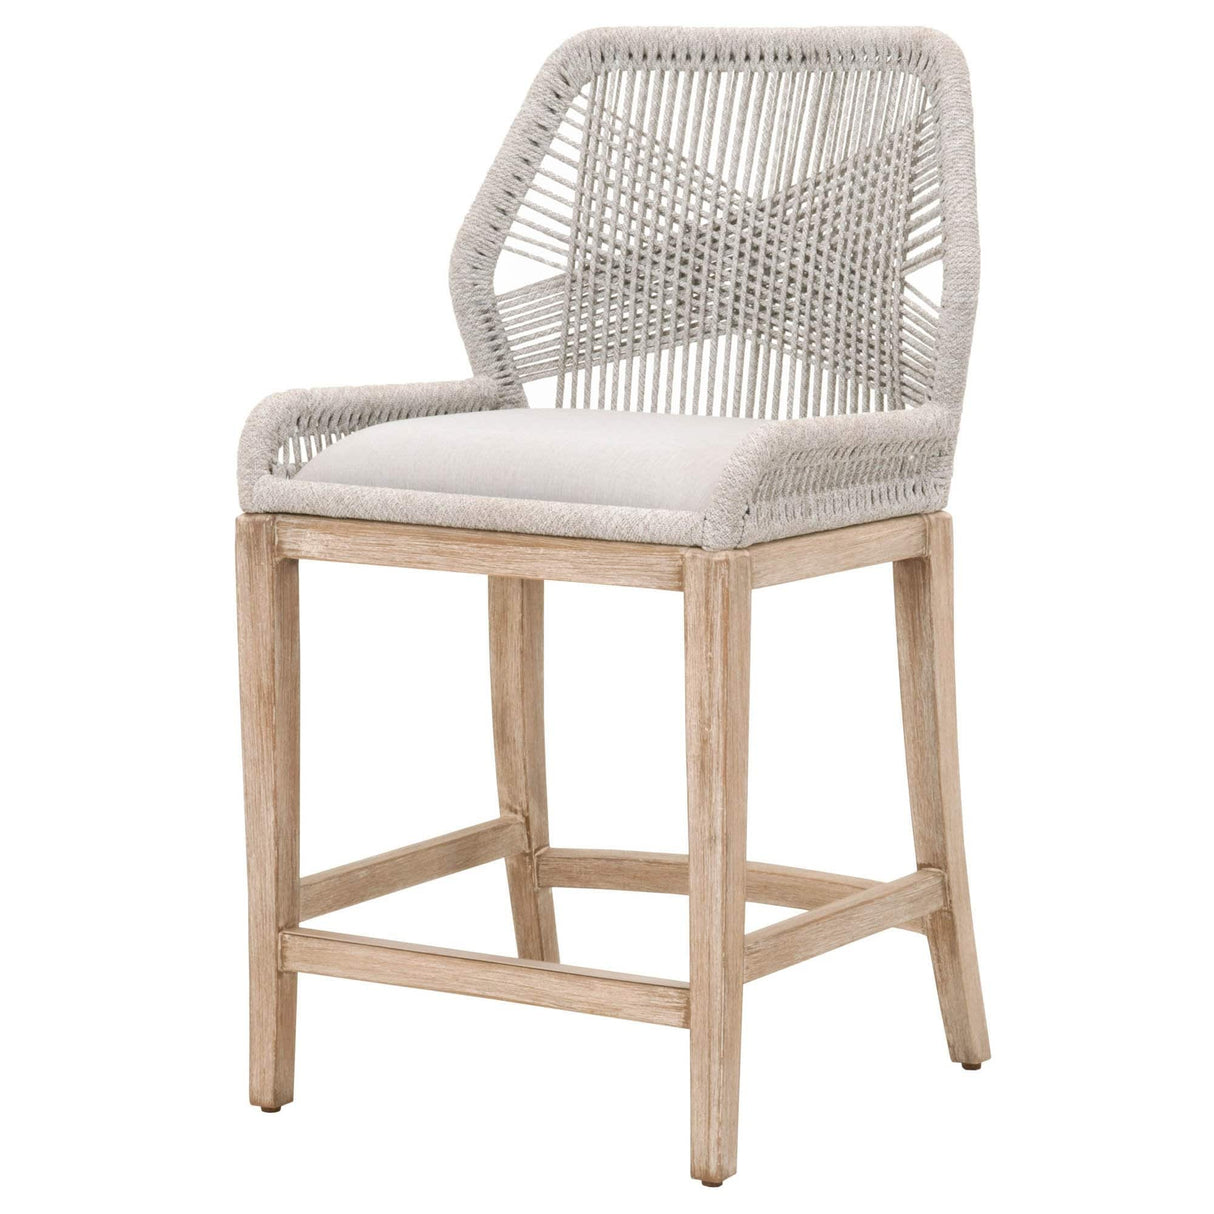 BLU Home Loom Counter Stool - Taupe and White Furniture orient-express-6808CS.WTA/PUM/NG